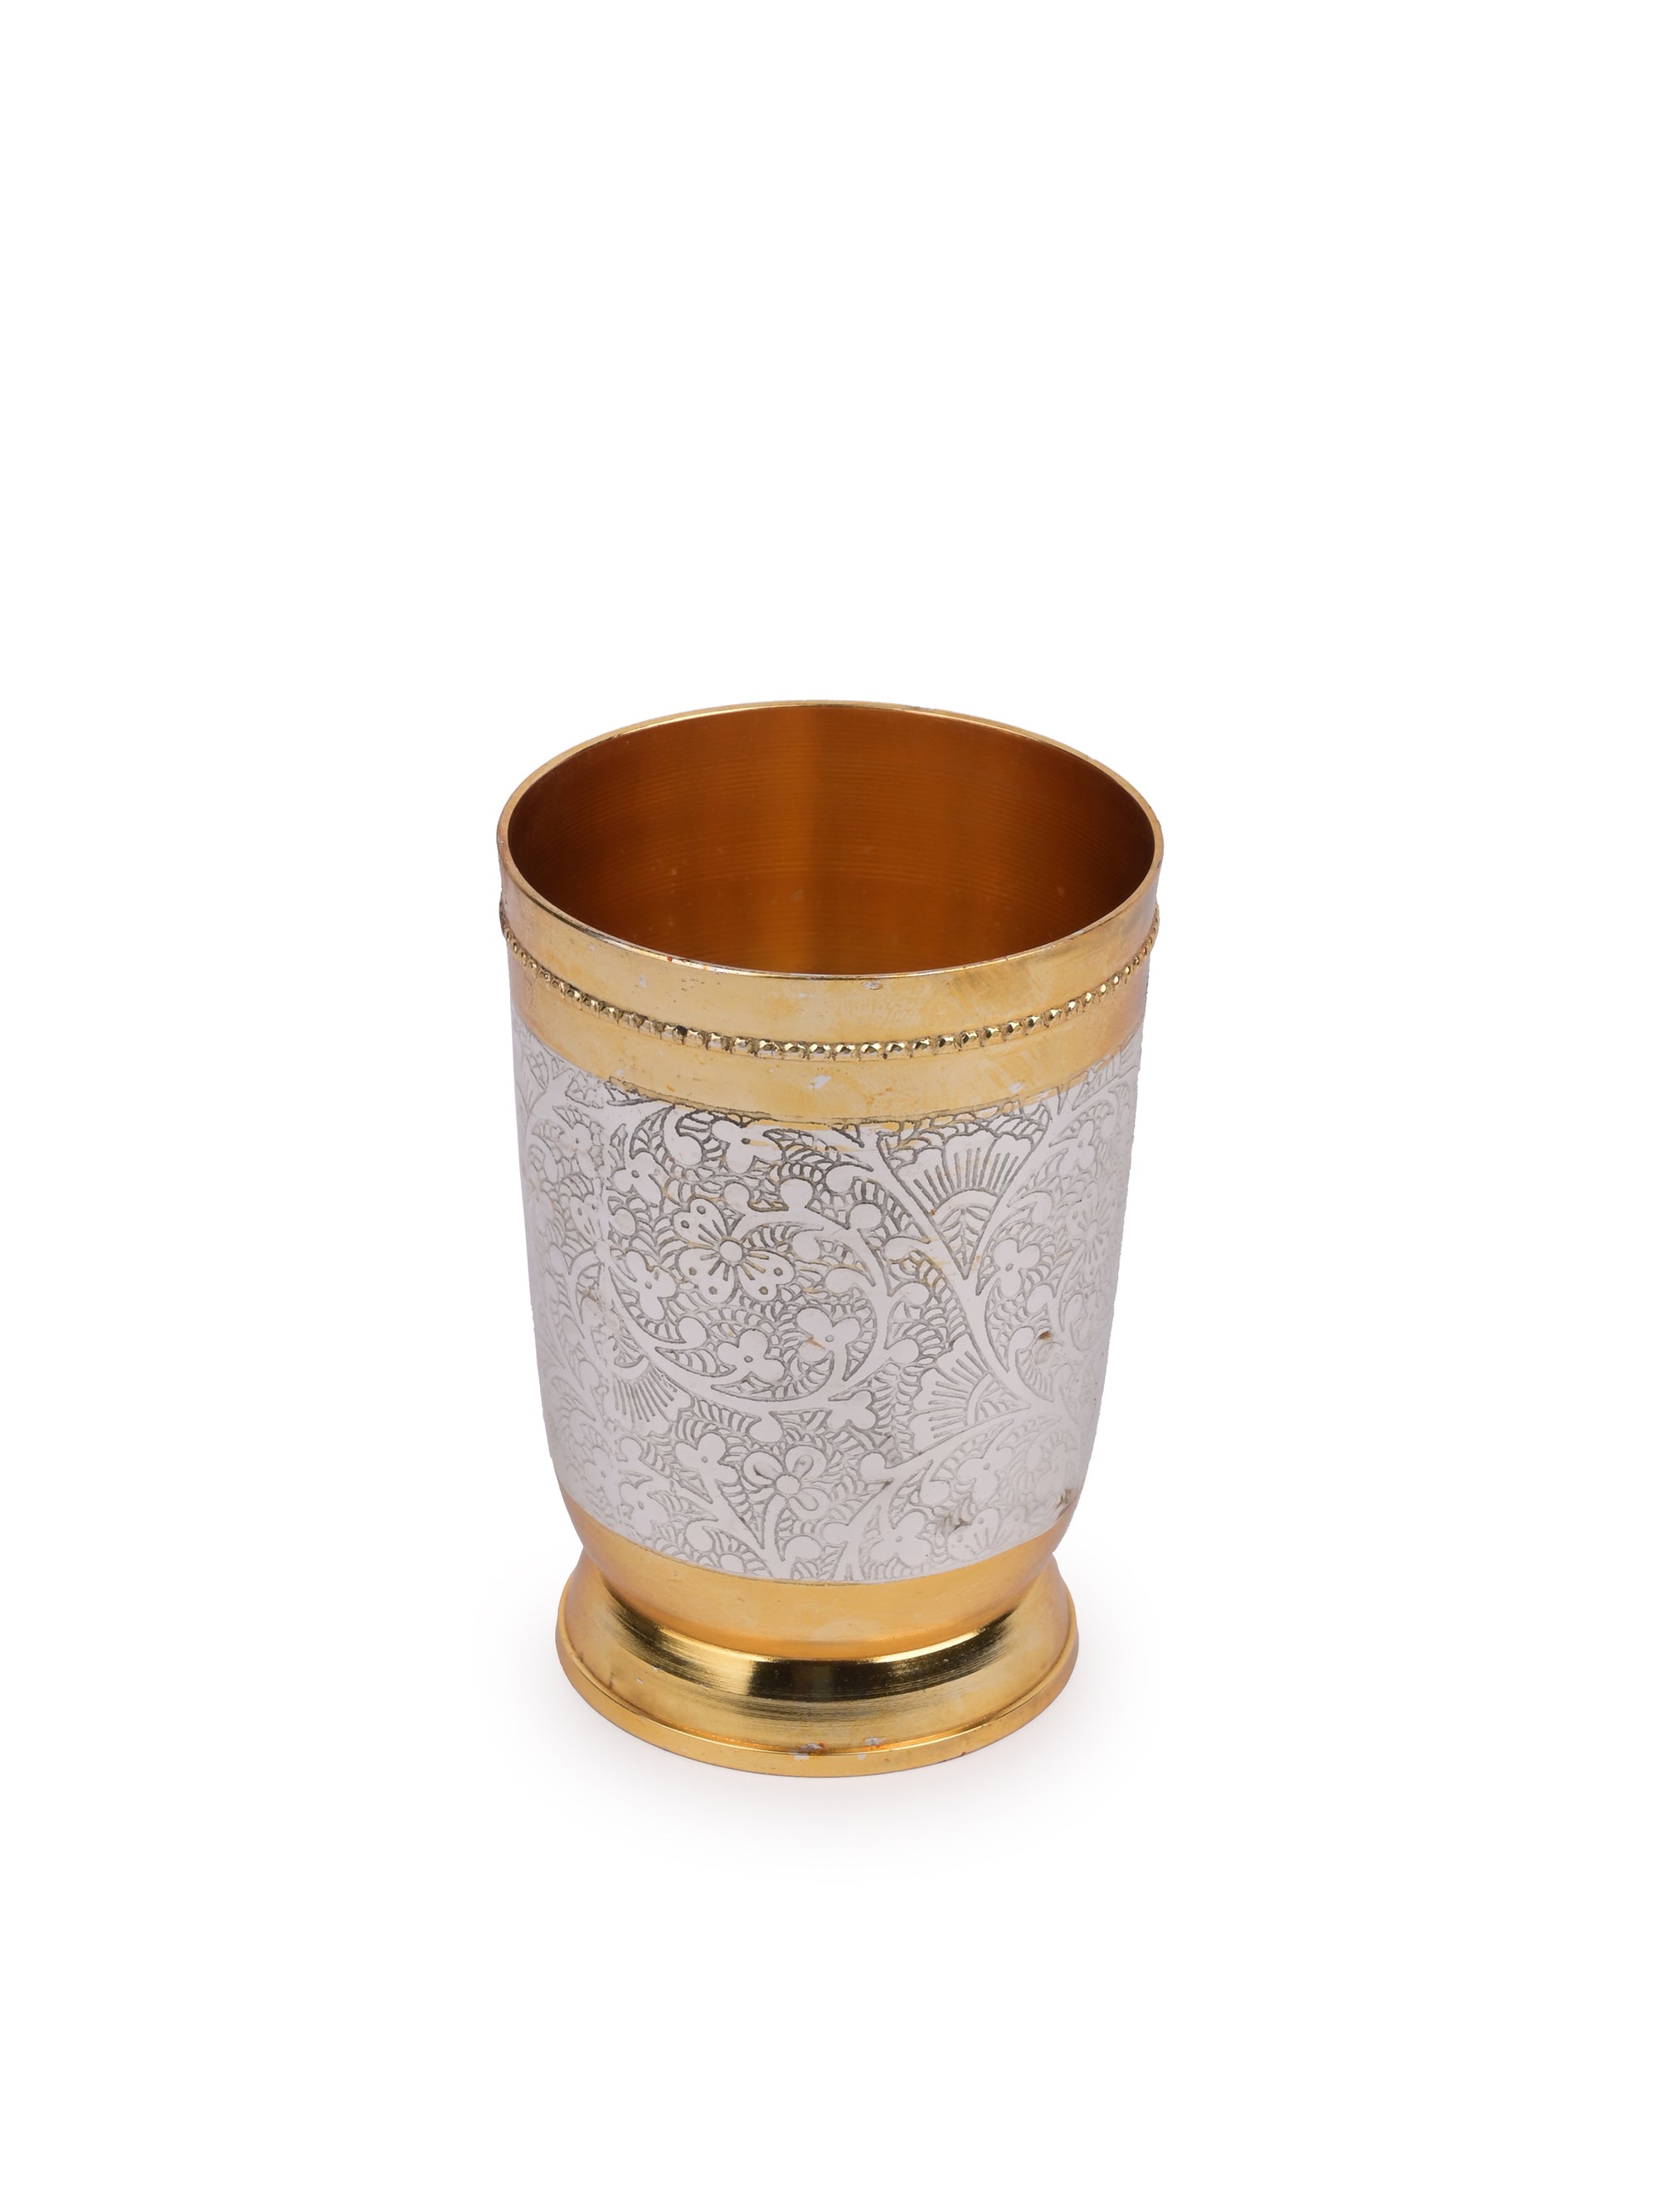 Brass made Stylish Drinkware set consisting of 1 Jug, 6 Glasses and 1 Tray in a Velvet Gift Box - The Heritage Artifacts